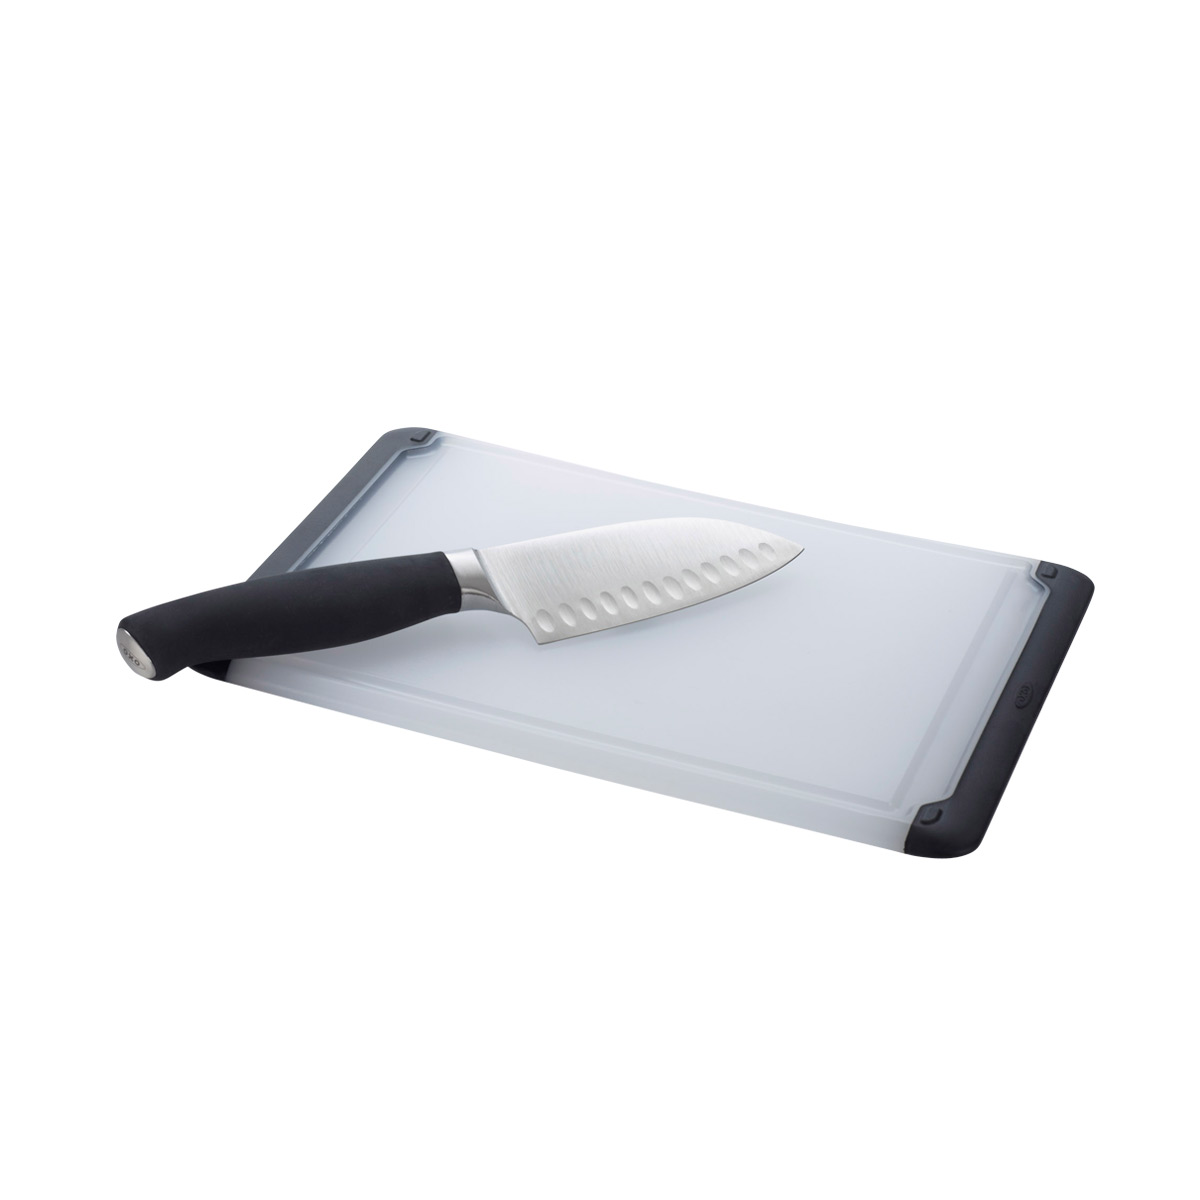  OXO Good Grips Plastic Carving & Cutting Board: Home